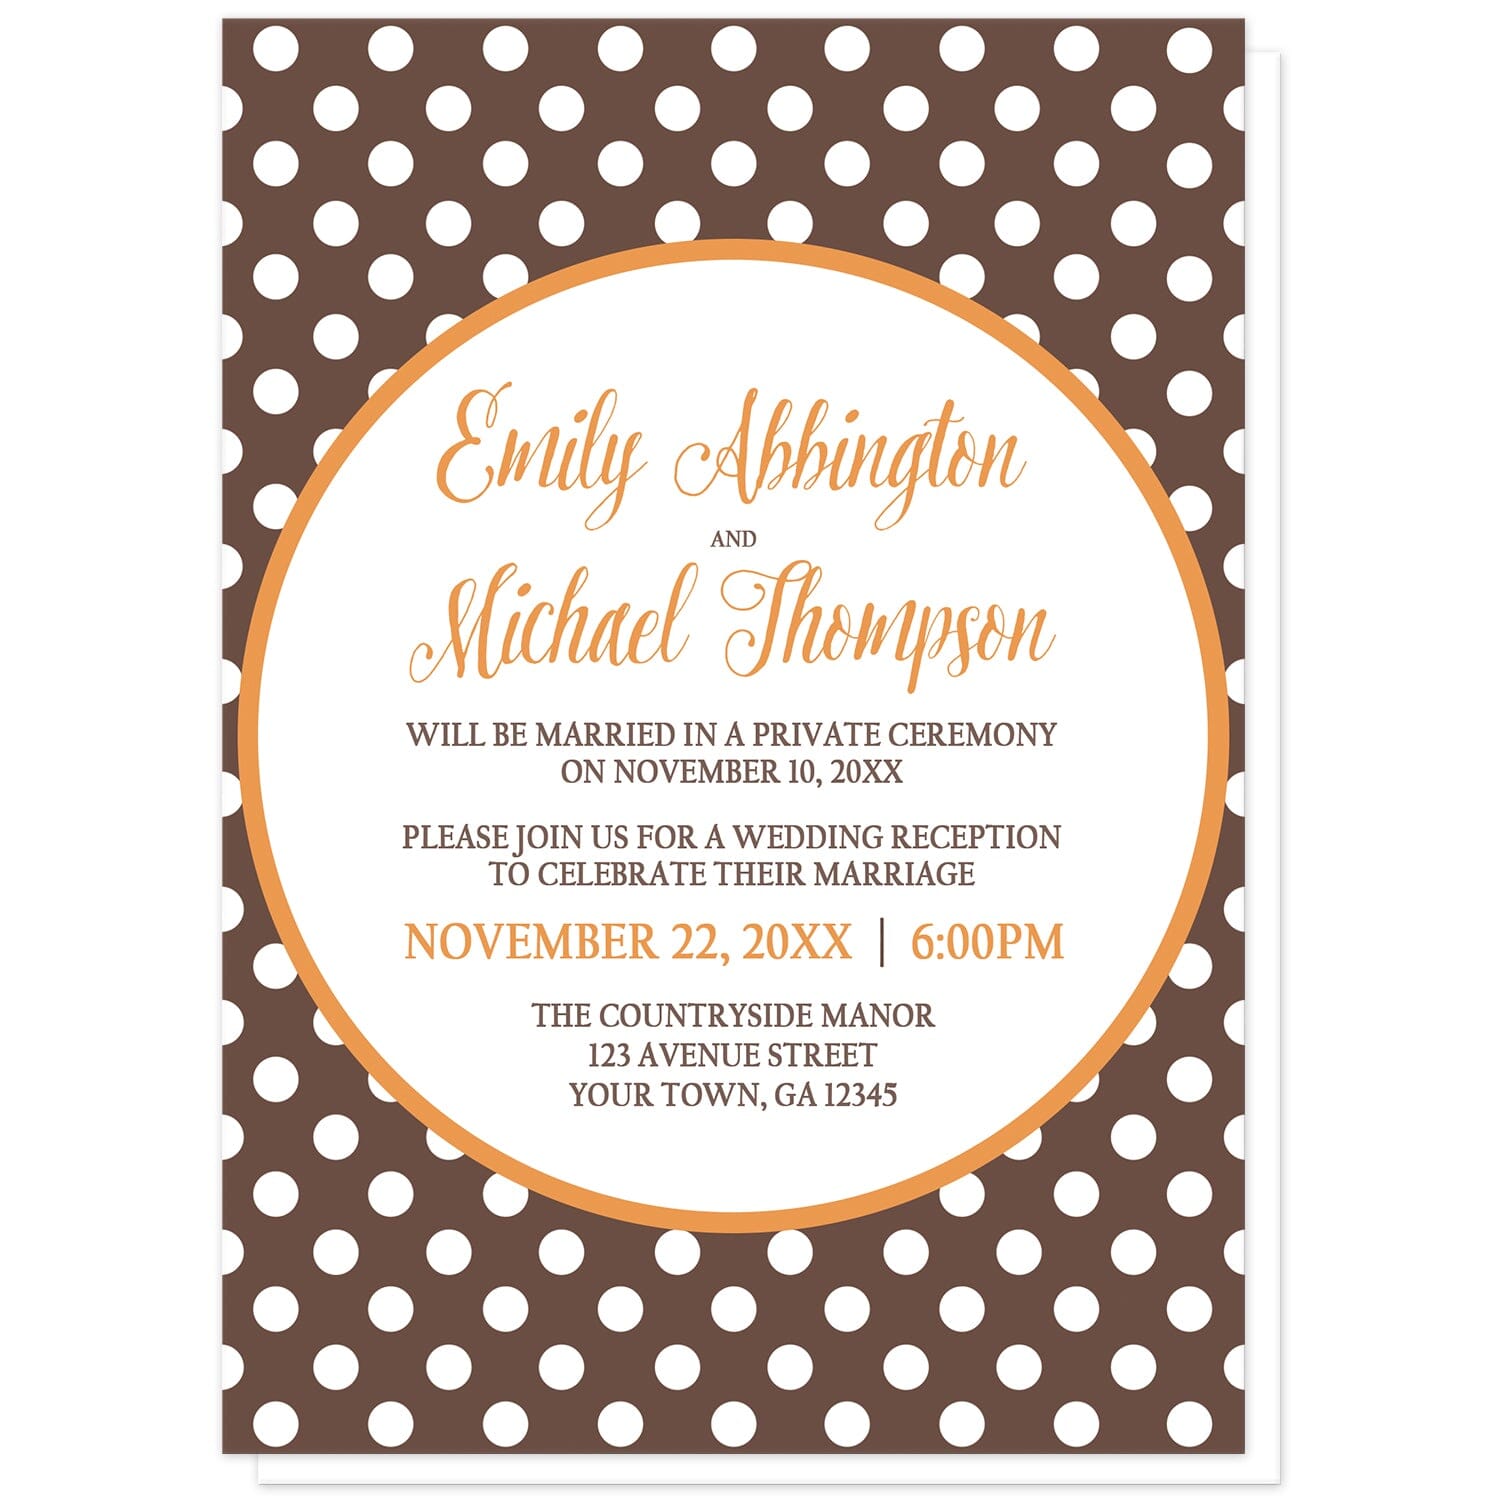 Orange Brown Polka Dot Reception Only Invitations at Artistically Invited. Autumn-inspired orange brown polka dot reception only invitations with your post-wedding reception details custom printed in orange and brown inside a white circle outlined in orange, over a brown polka dot pattern. The couple's names and reception date are printed in orange while the remaining details are printed in brown.